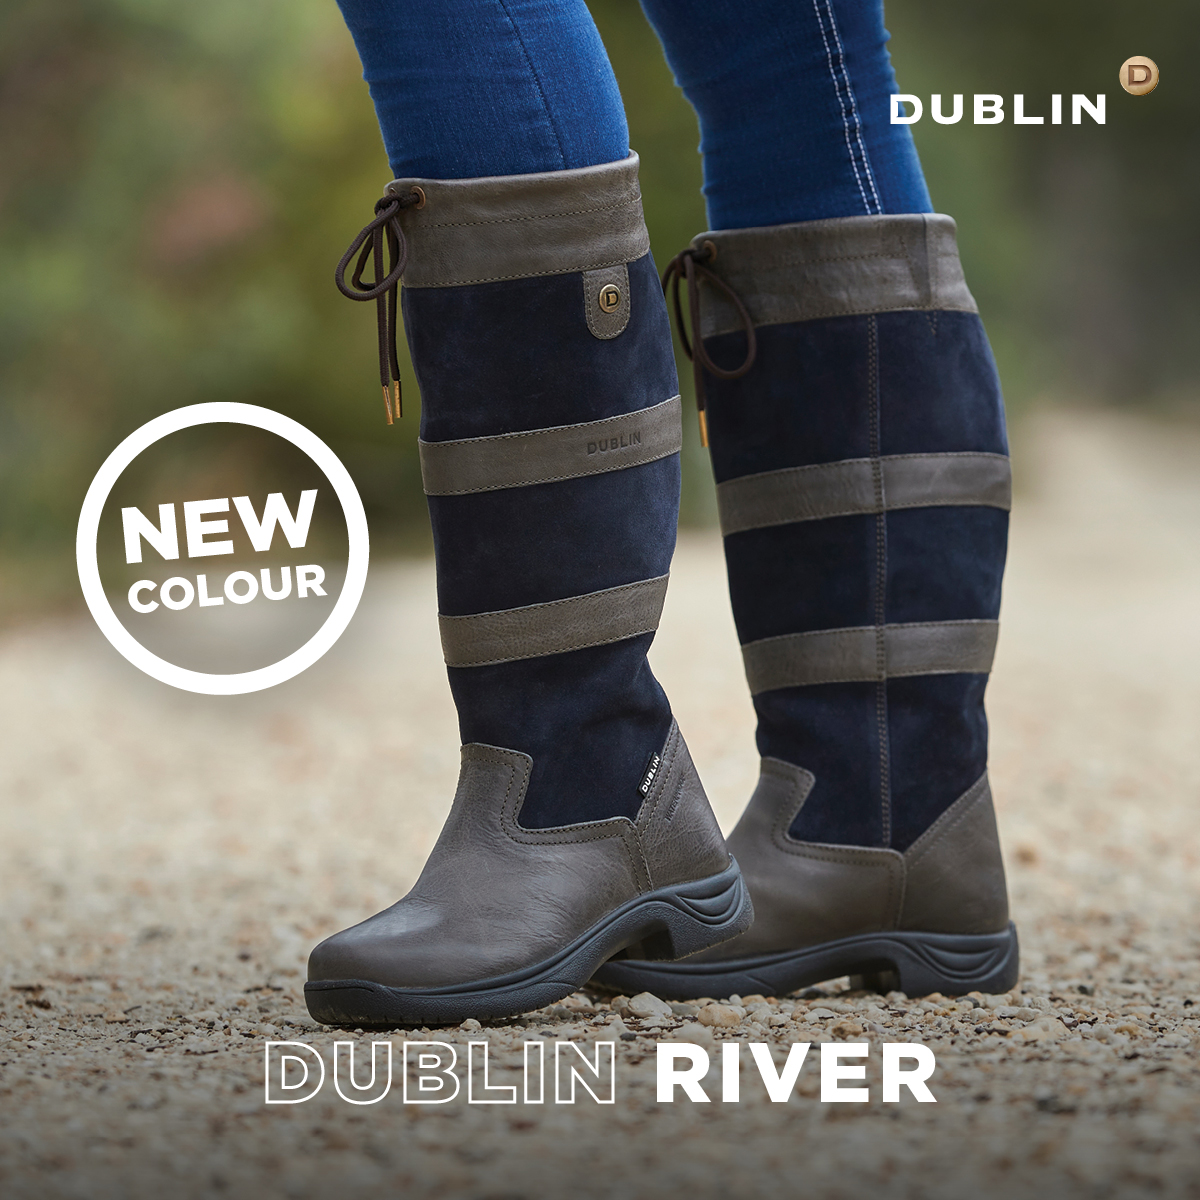 Dublin River Boots Waterproof Full Grain Leather Horse Riding Country Boot NEW 